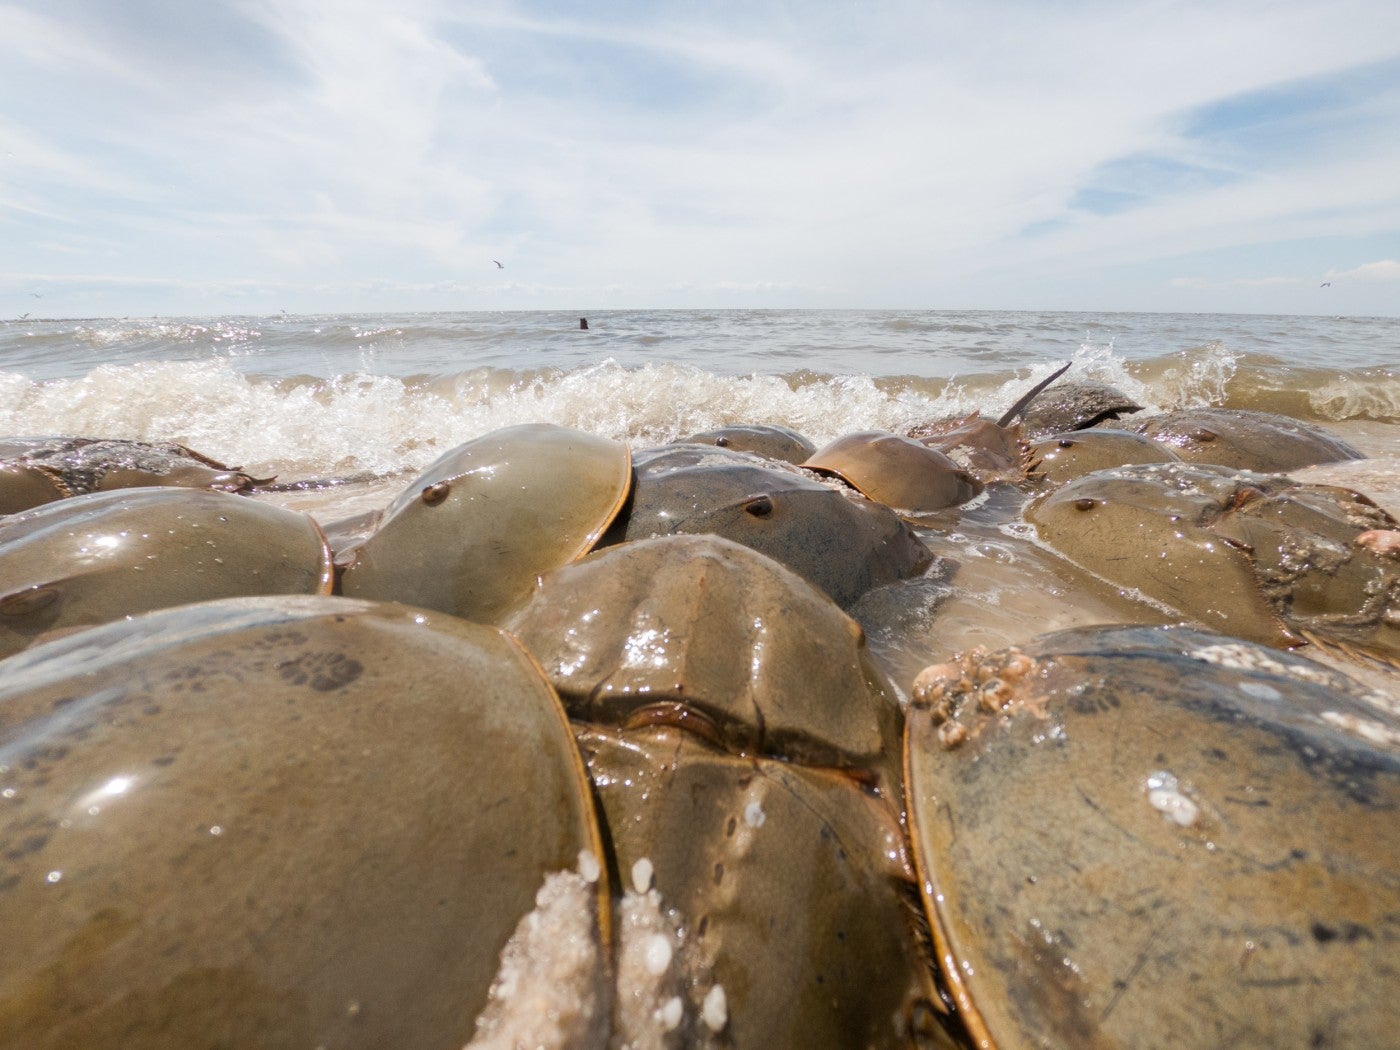 Horseshoe crabs pile on top of each other on a sandy shore near a breaking wave